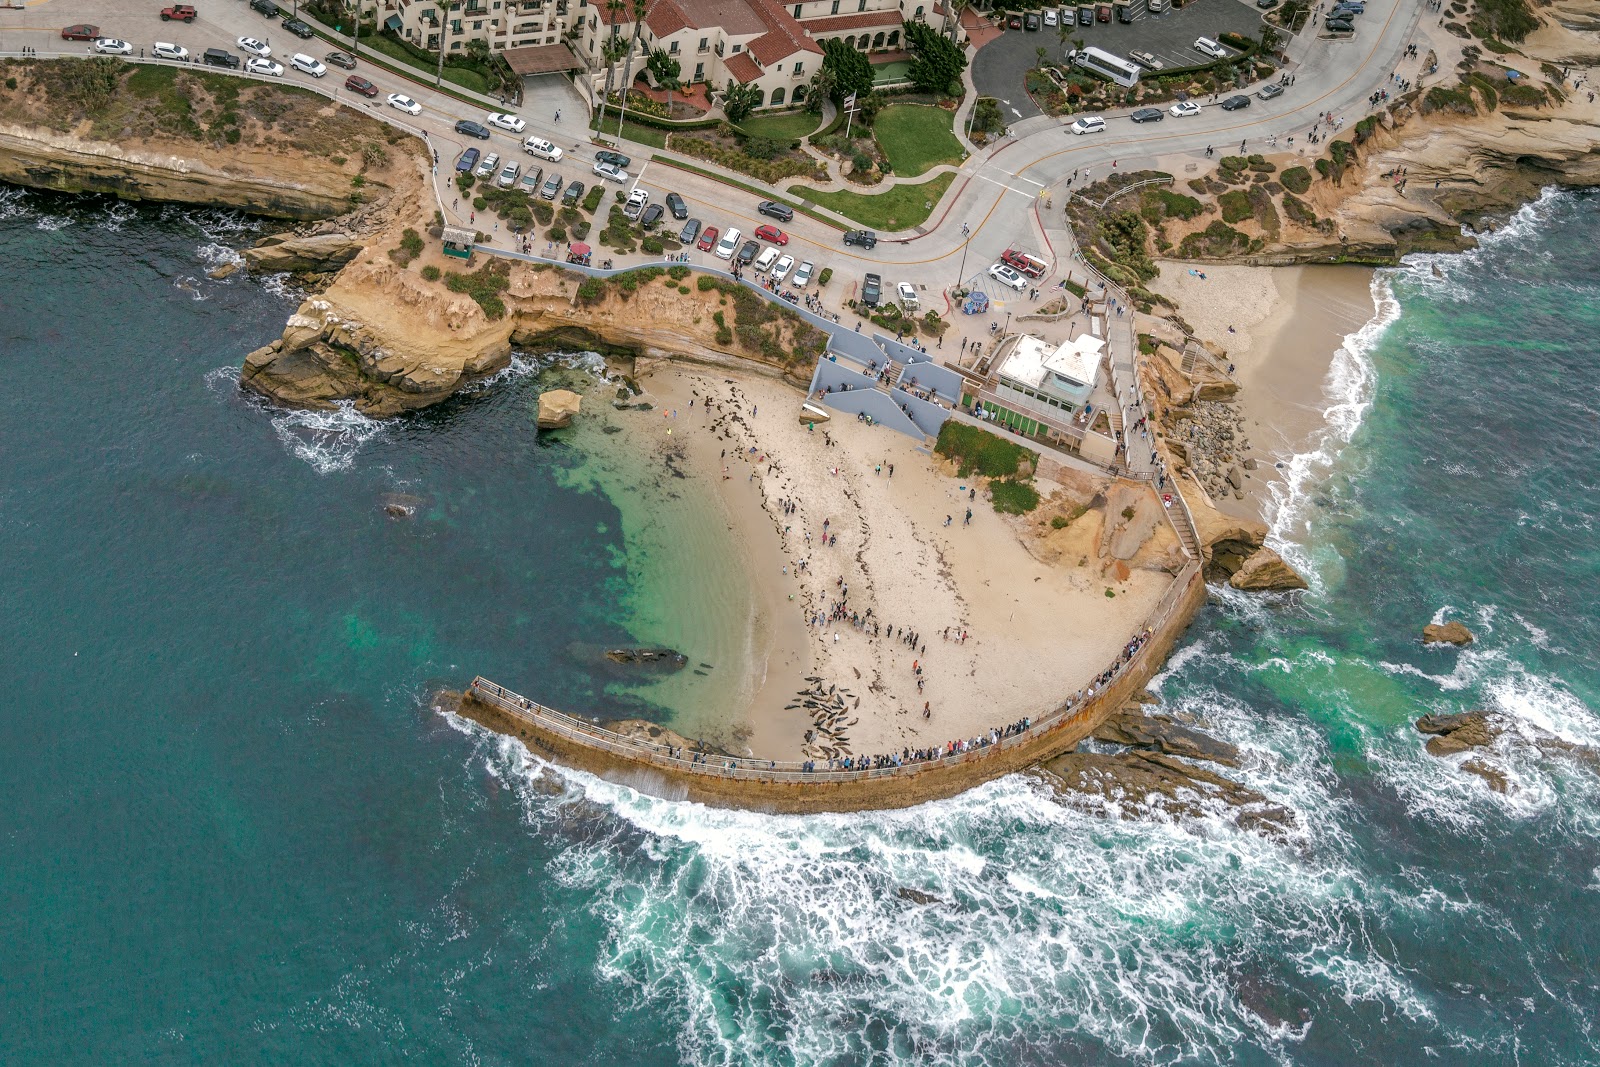 Photo of Children's Pool La Jolla and the settlement